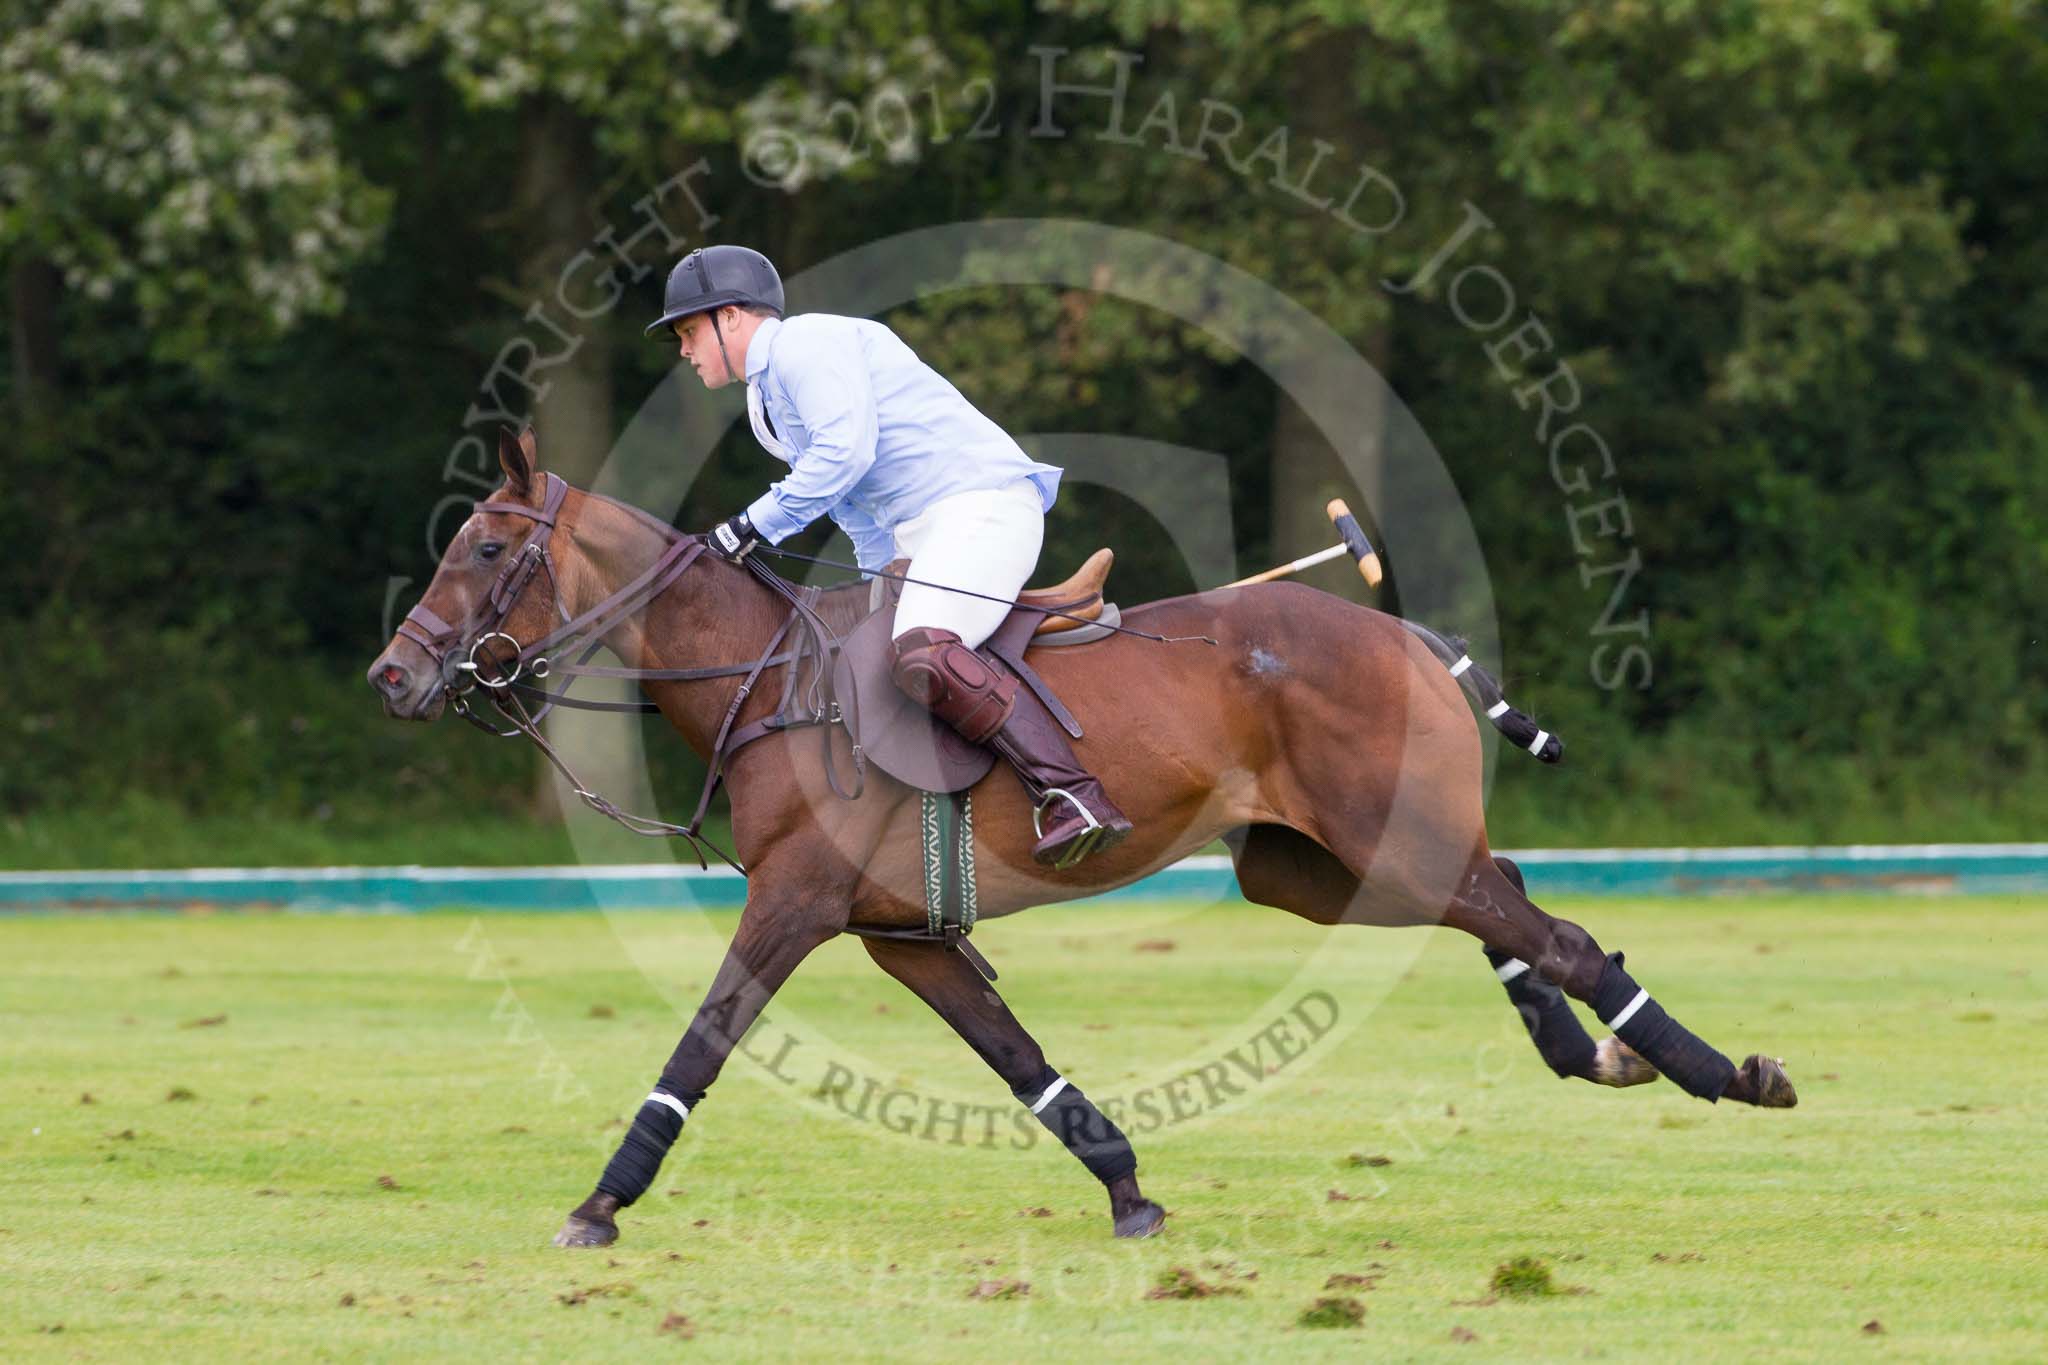 7th Heritage Polo Cup semi-finals: La Mariposa Argentina Alex Vent alone on the run..
Hurtwood Park Polo Club,
Ewhurst Green,
Surrey,
United Kingdom,
on 04 August 2012 at 15:55, image #296